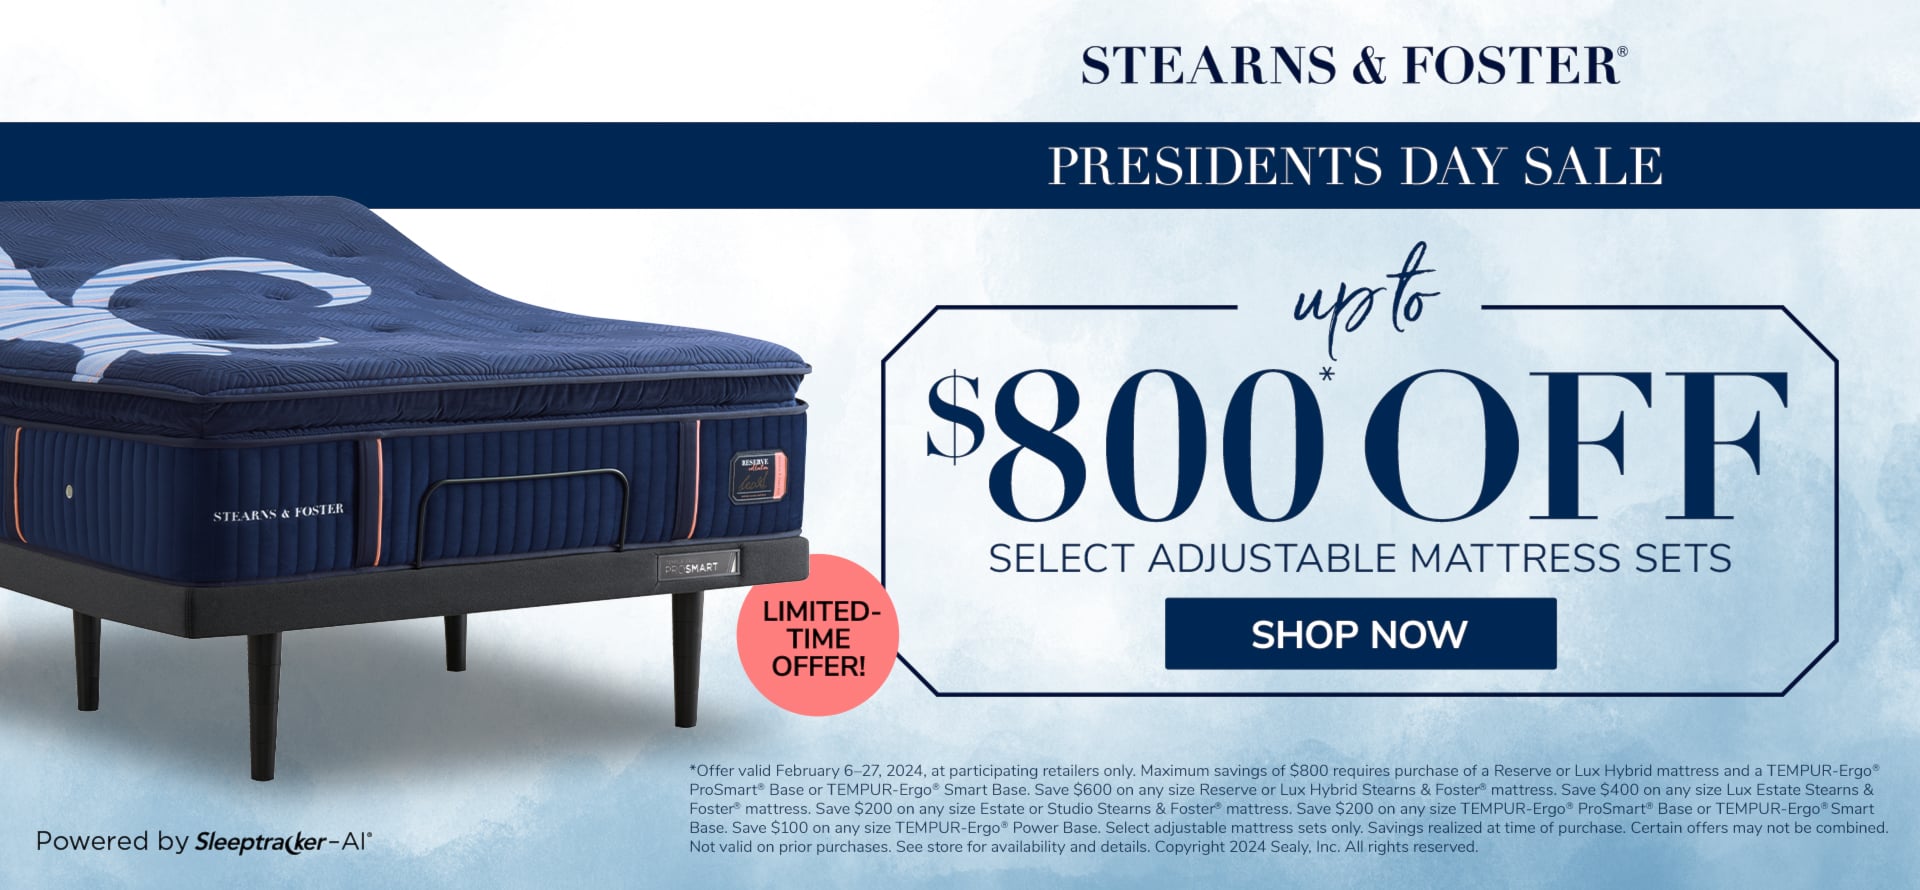 Save up to $800 on Select Stearns & Foster Adjustable Sets